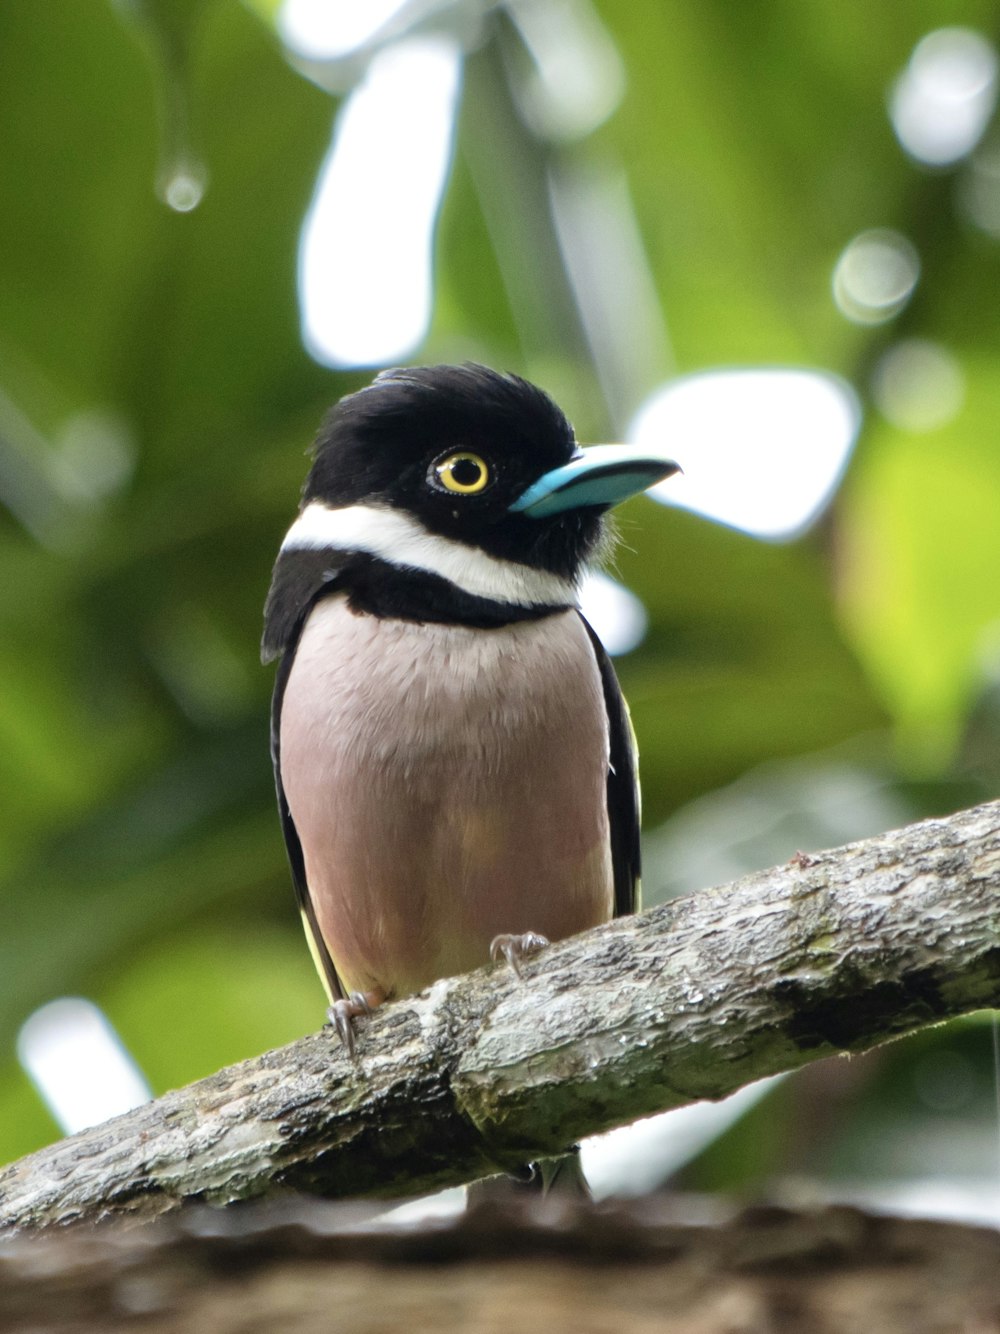 a black and white bird with a blue beak sitting on a tree branch